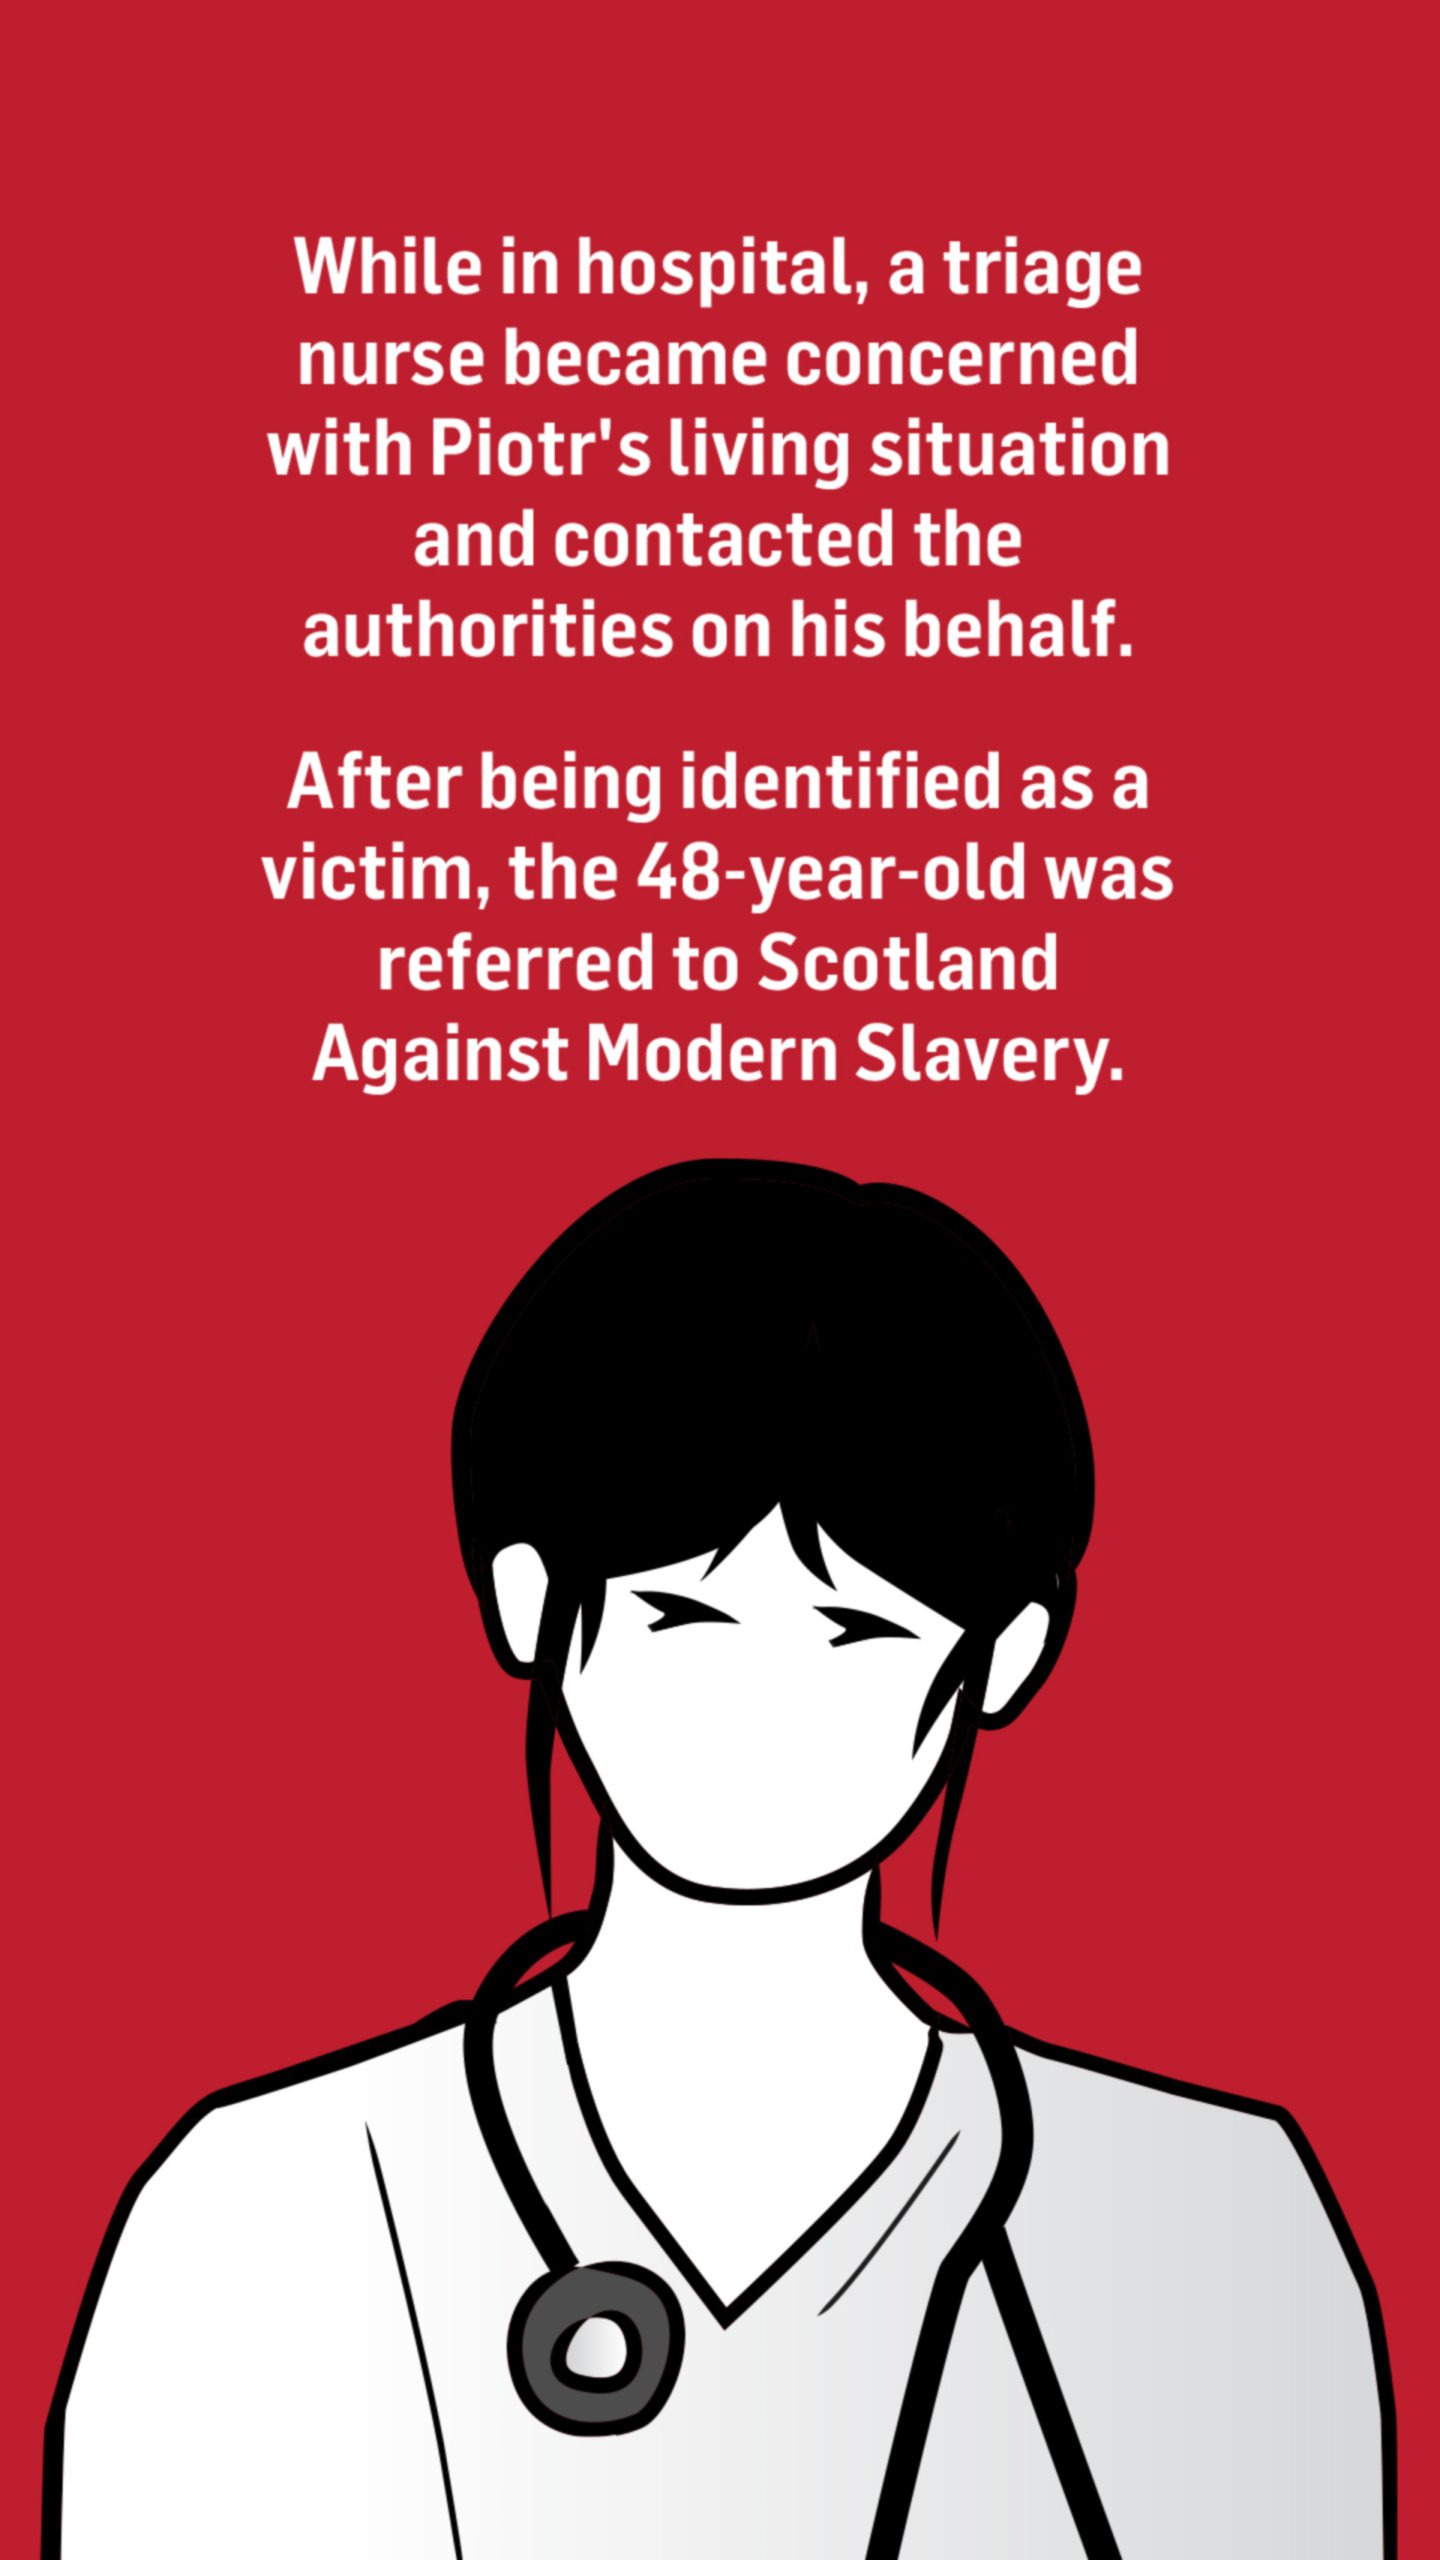 An illustration of a nurse with the words: While in hospital, a triage nurse became concerned with Piotr's living situation and contacted the authorities on his behalf.

After being identified as a victim, the 48-year-old was referred to Scotland Against Modern Slavery.